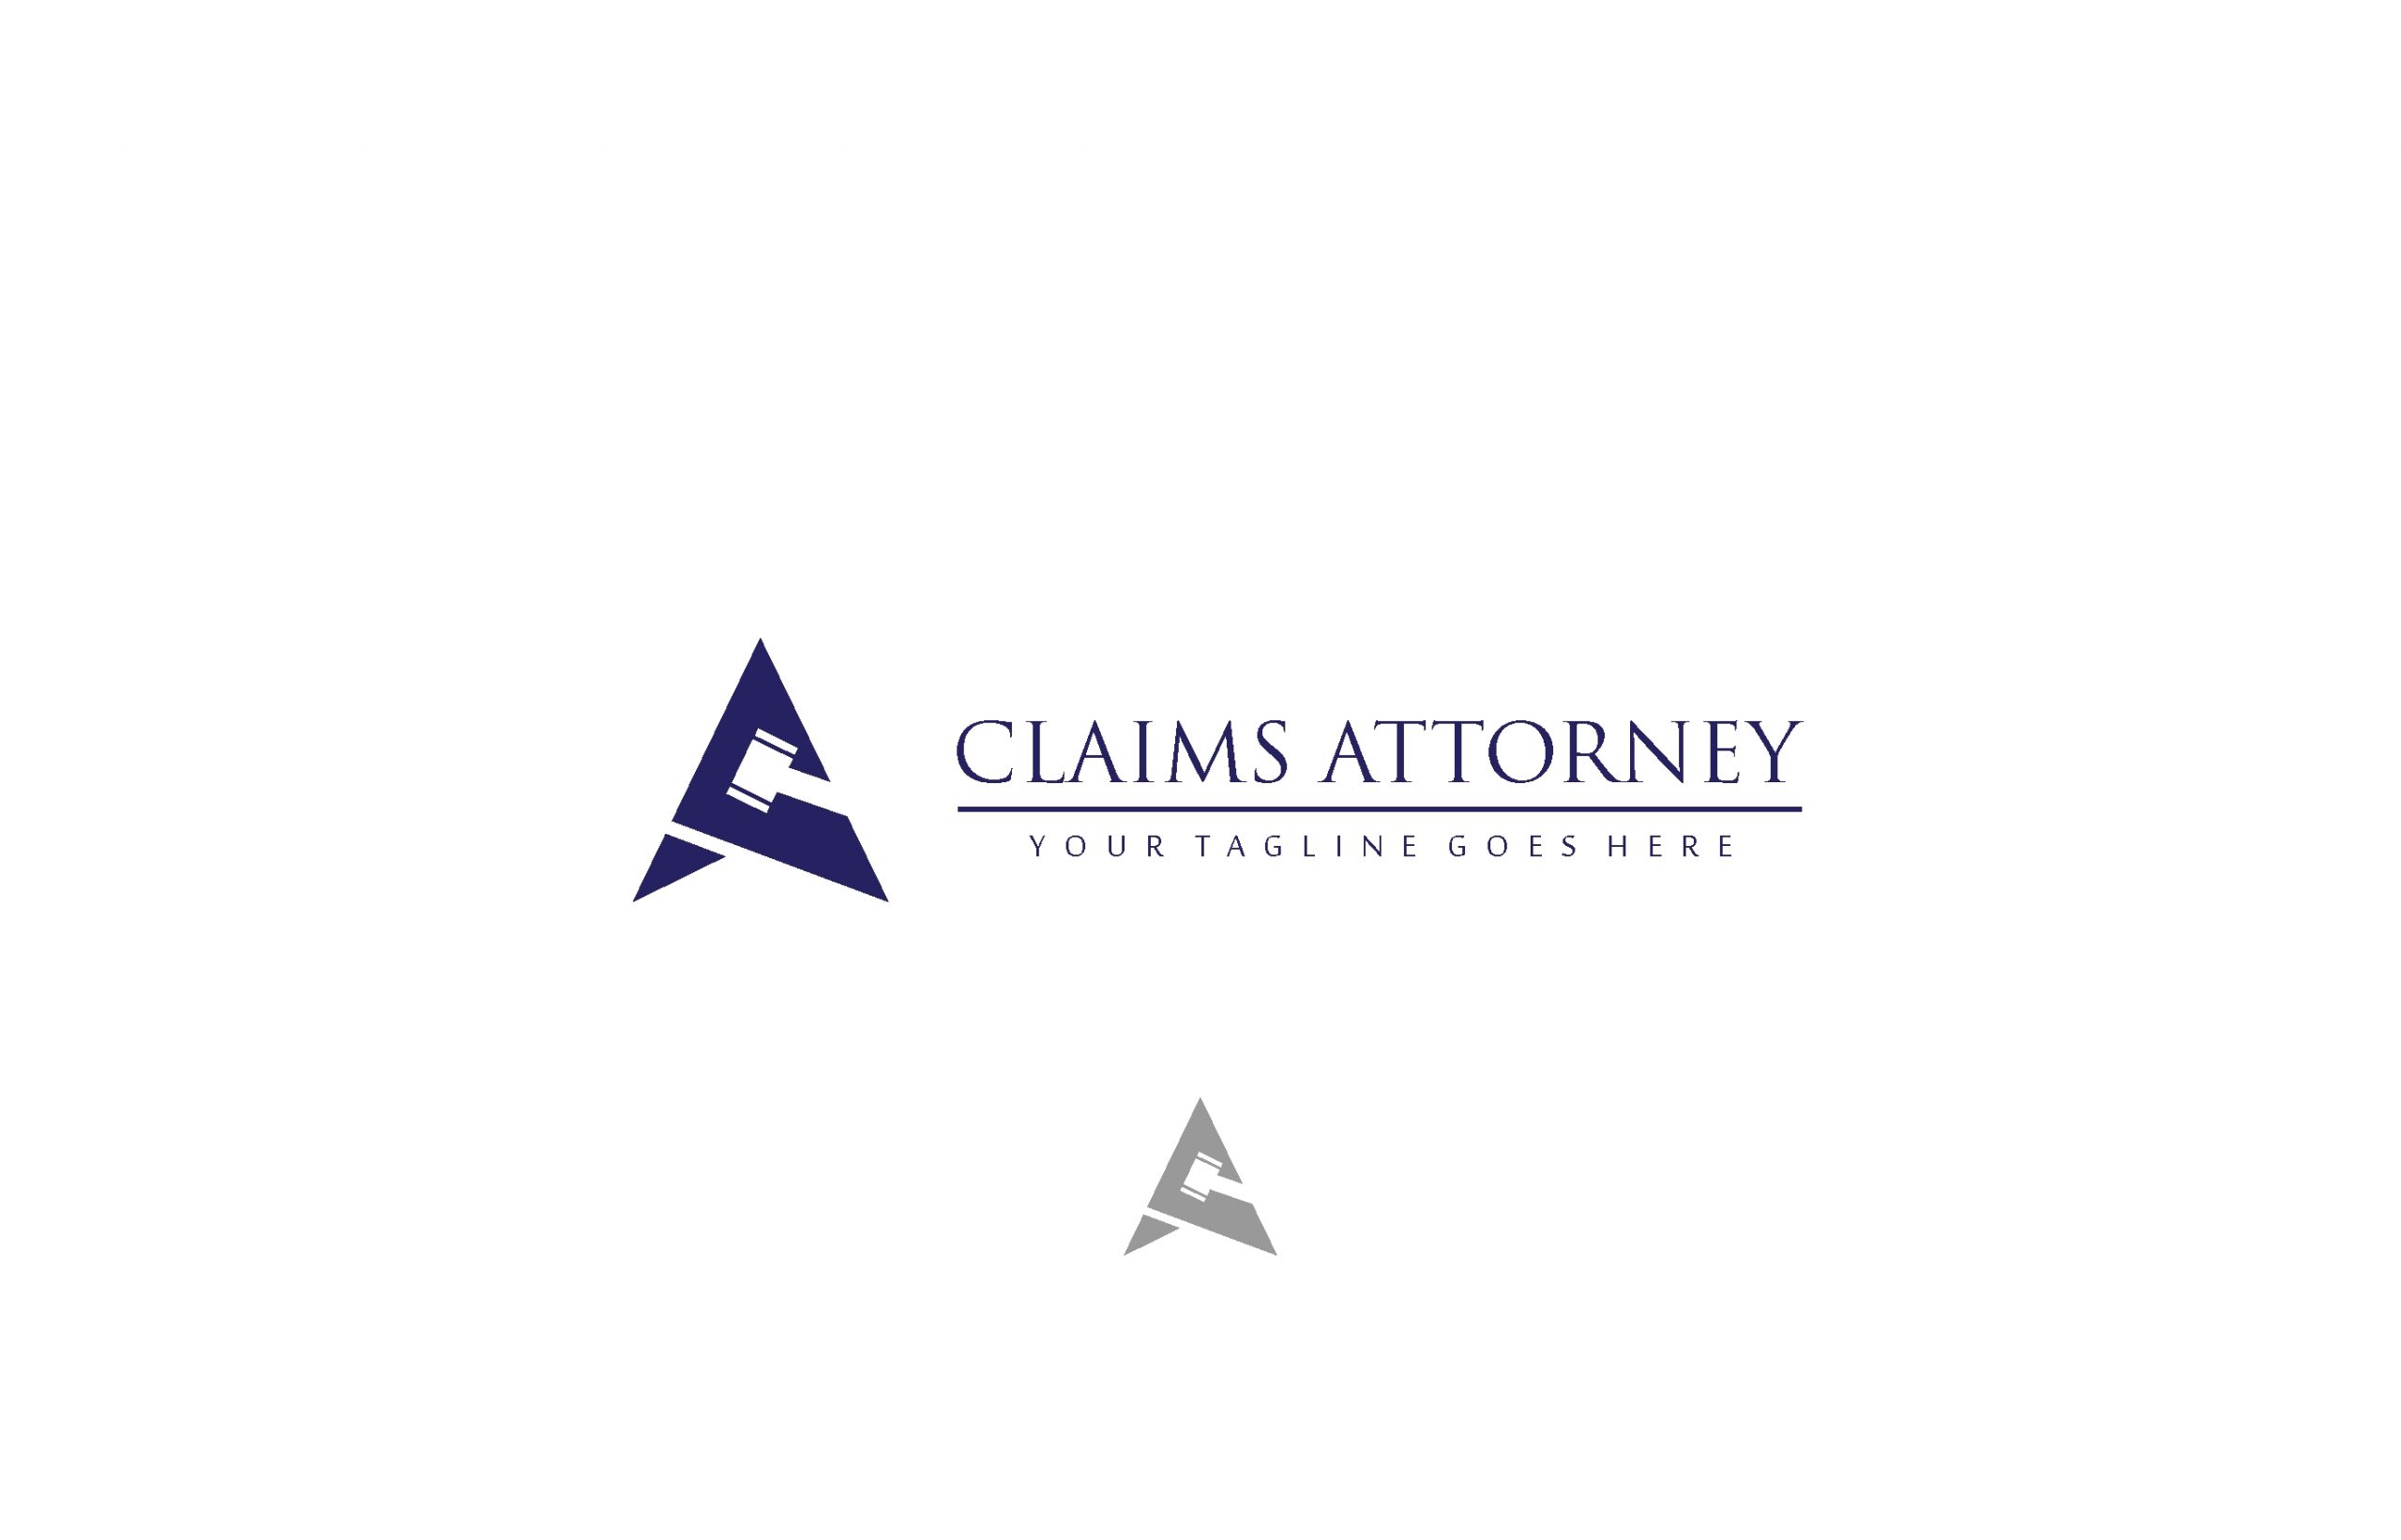 Claims Attorney